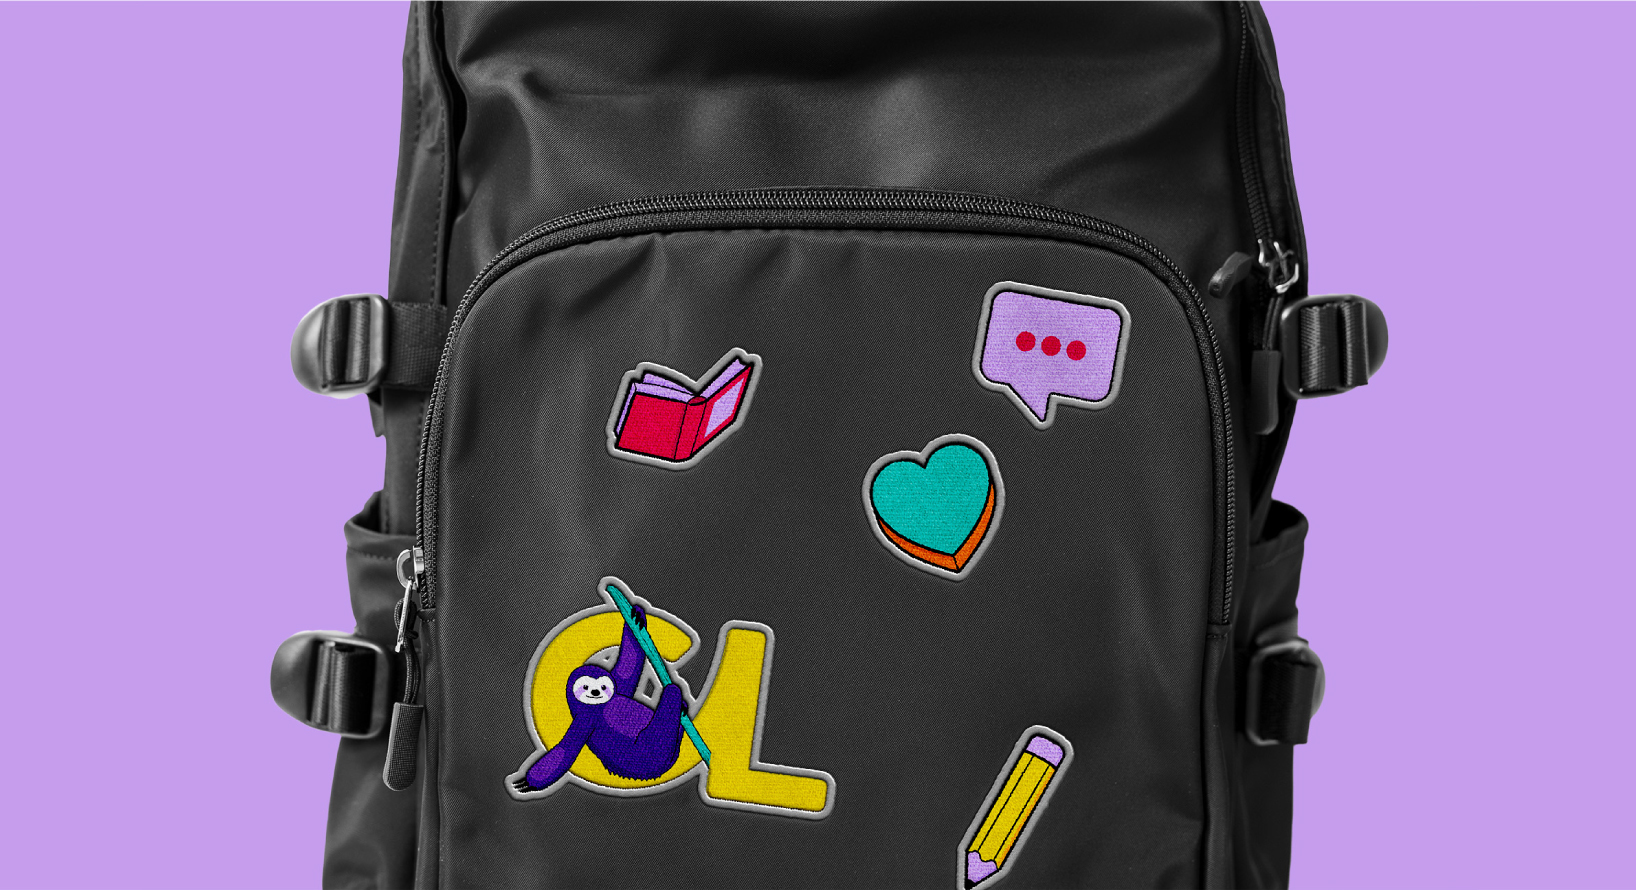 CCL badges on a black backpack, sitting on a purple background